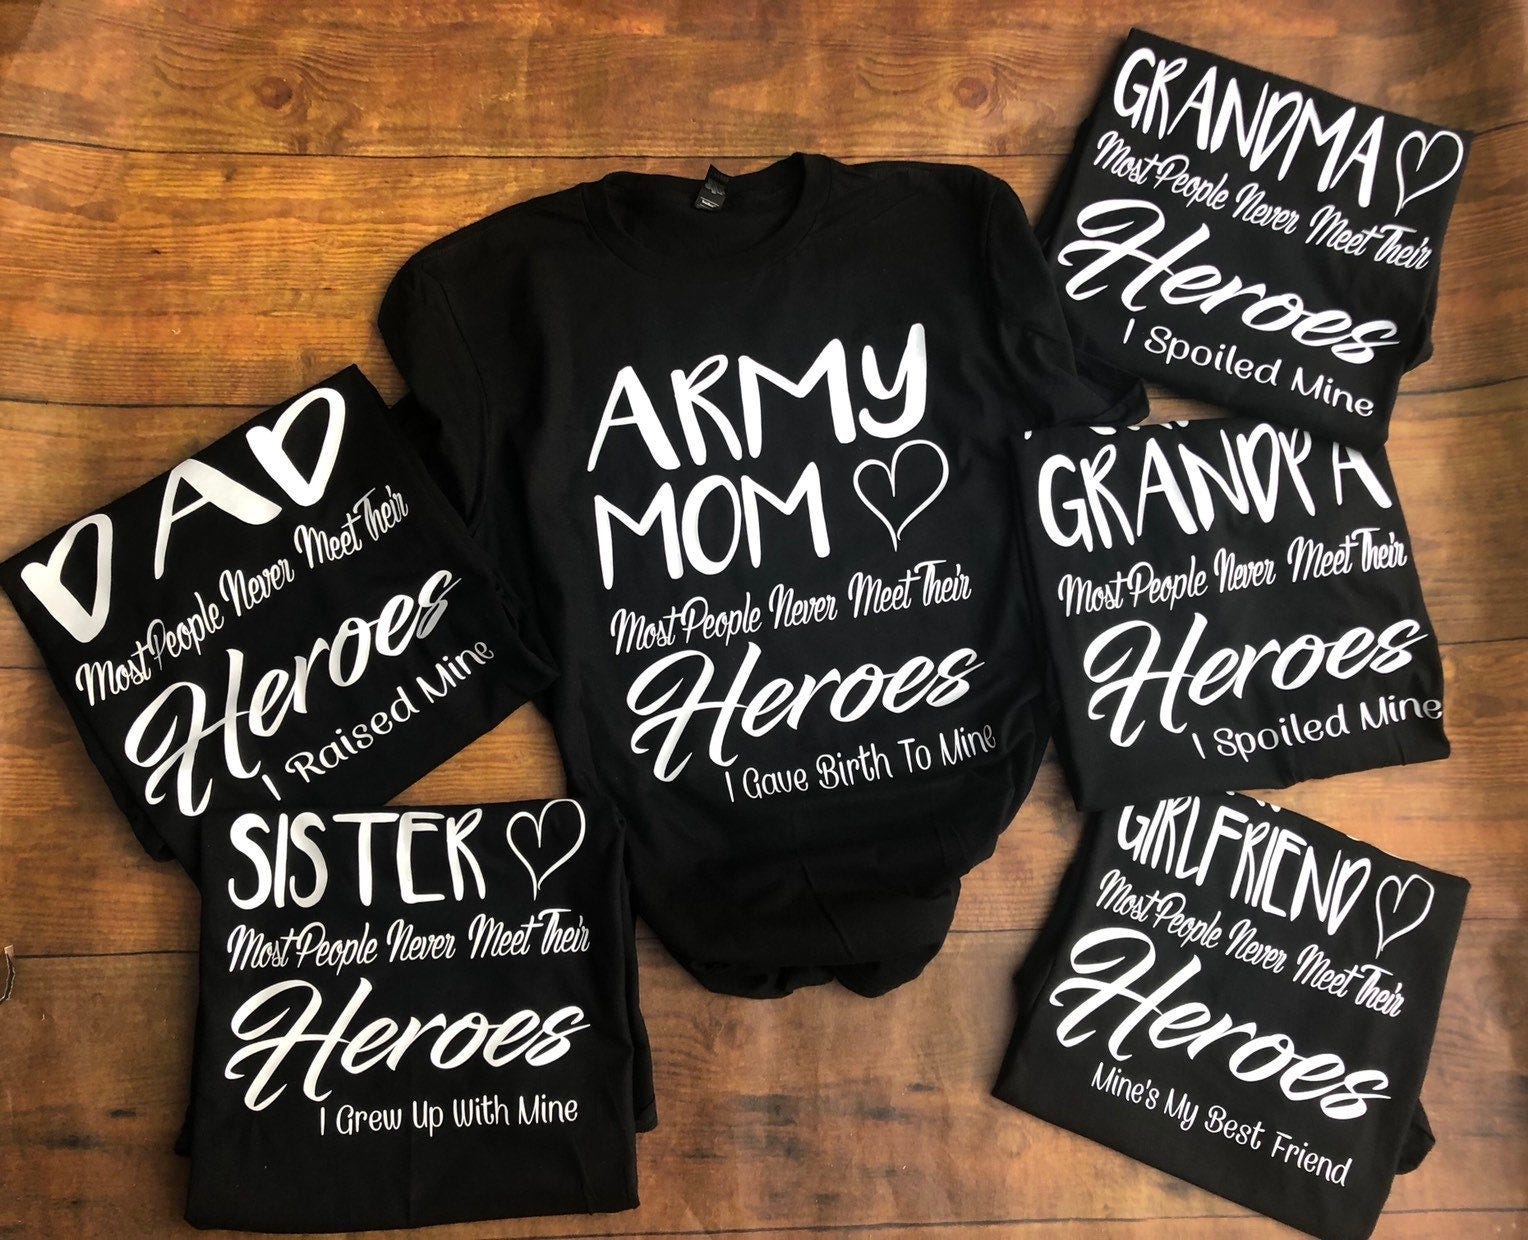 Most people never meet their heroes. I raised mine. Army son. Army daughter. Army Shirt. Family shirts. Army mom shirt. Armed Forces. Milita